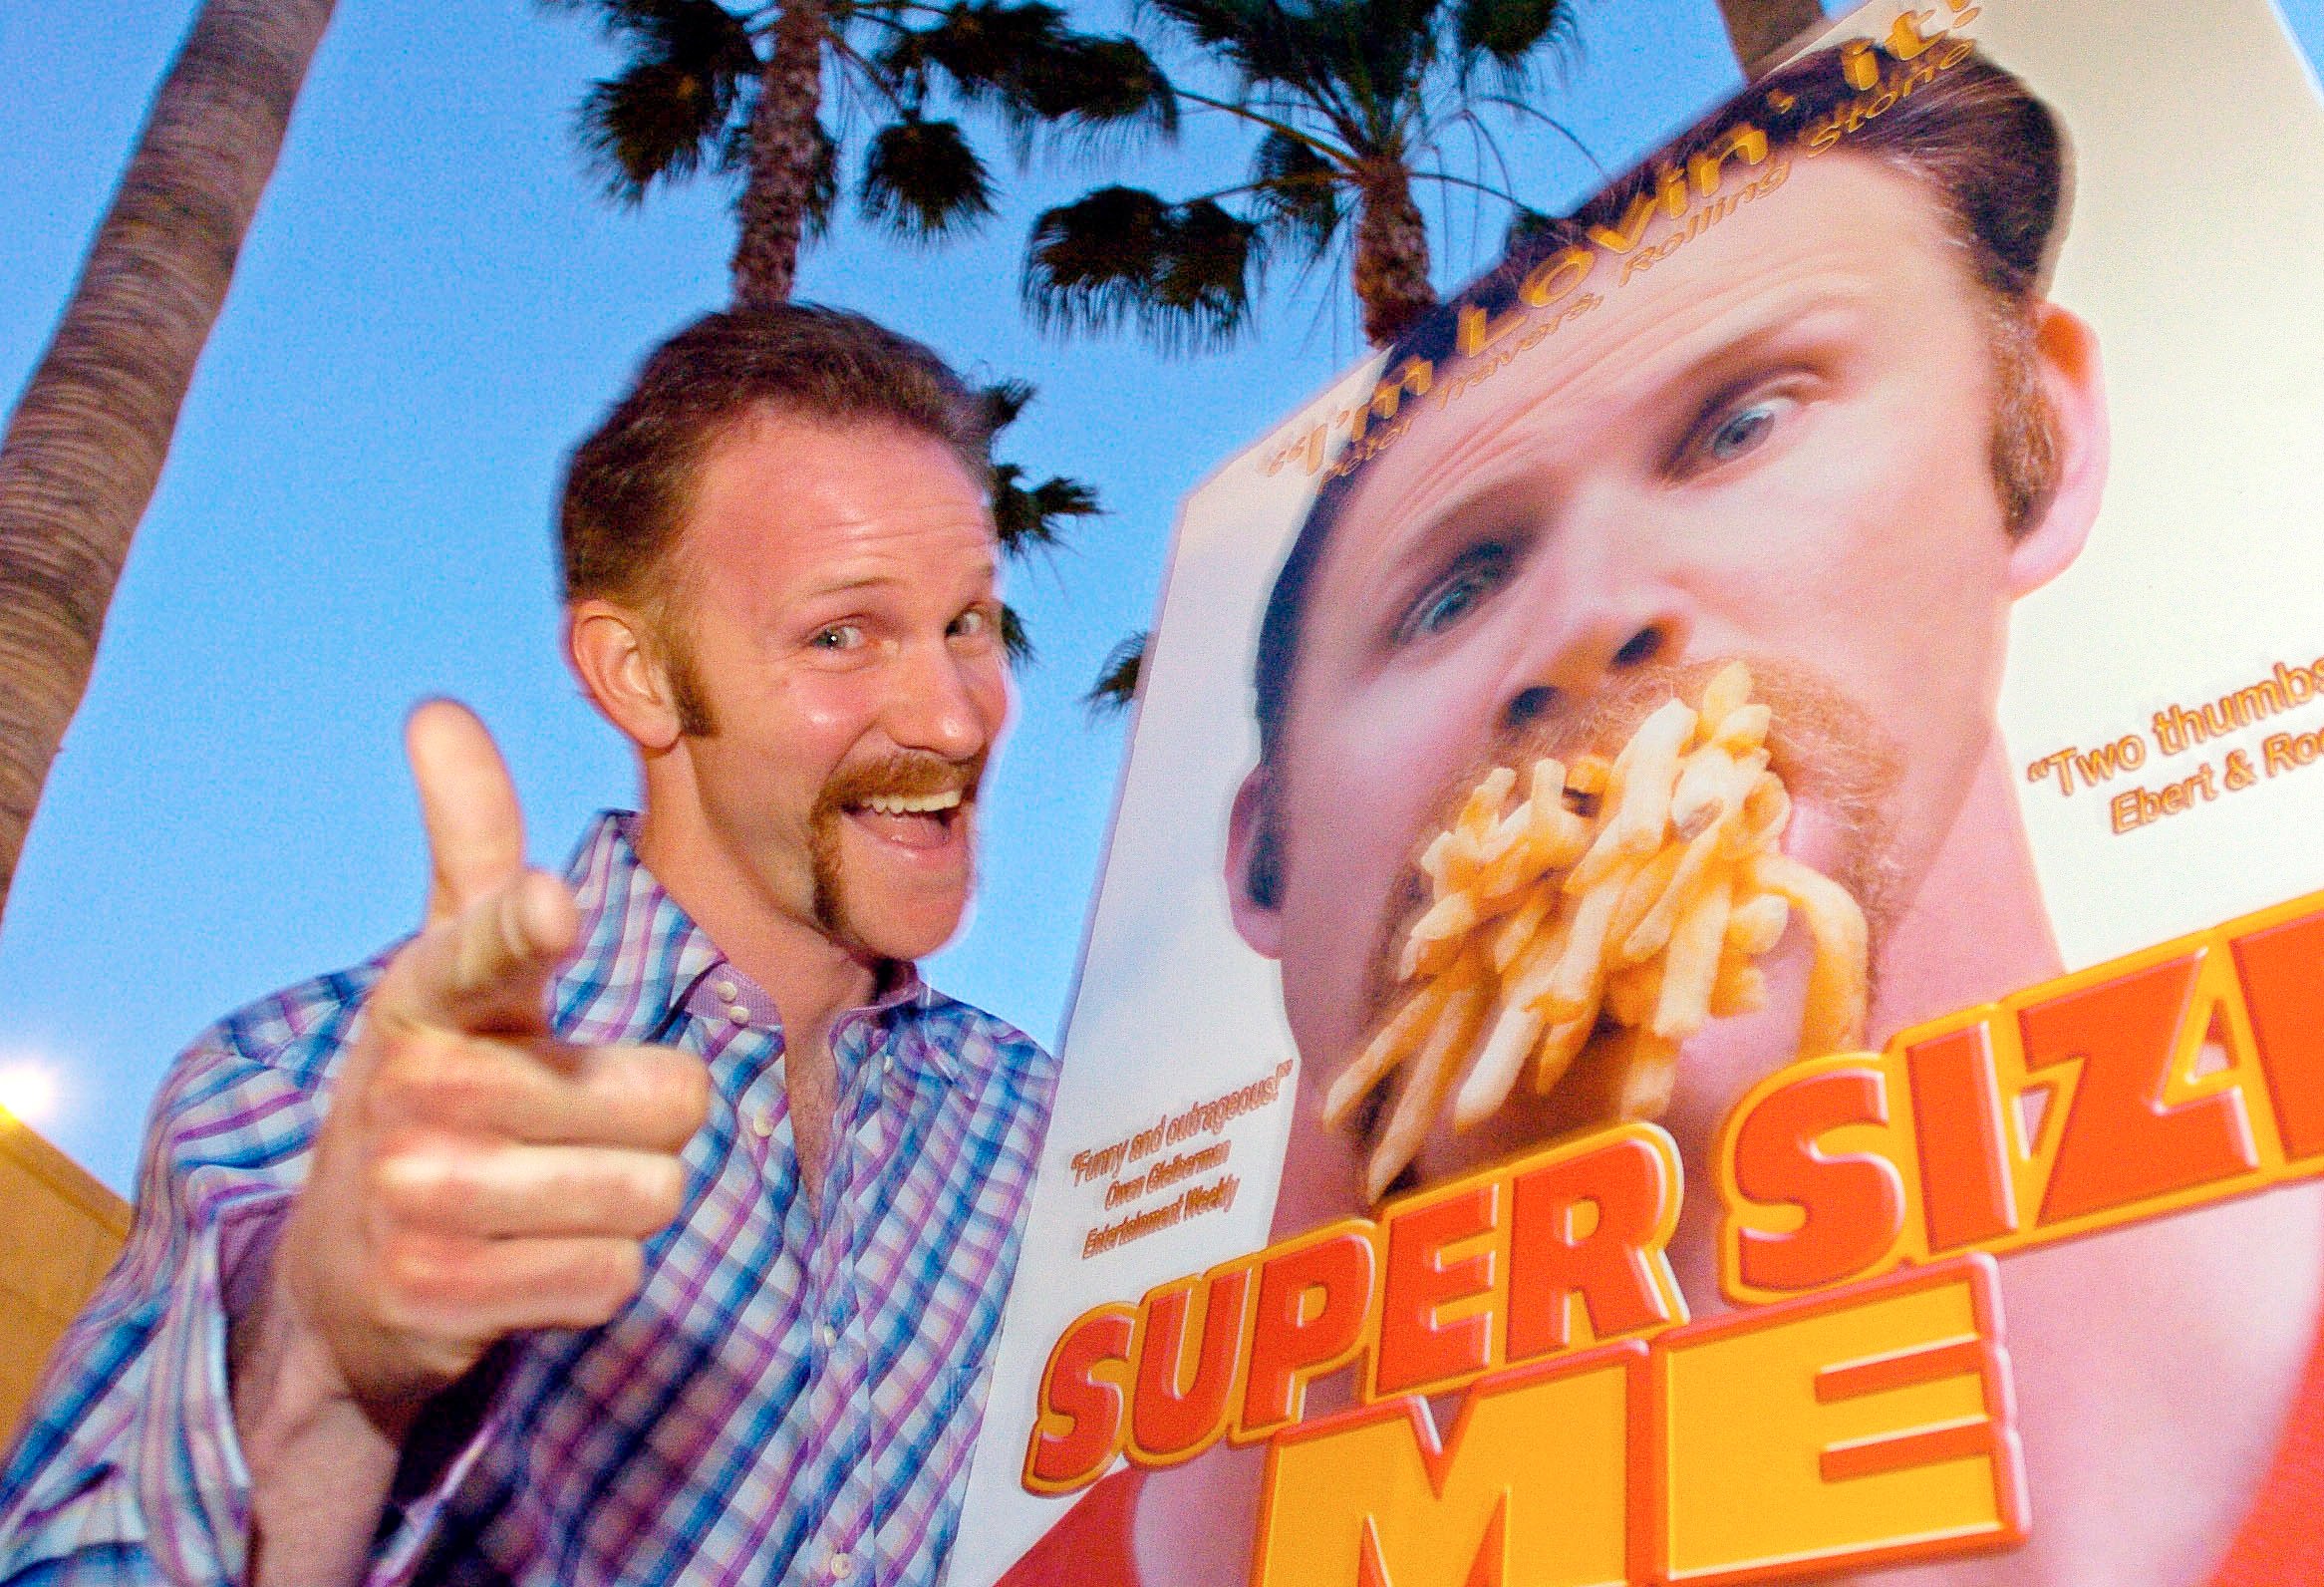 Morgan Spurlock poses at the Los Angeles premiere of his film Super Size Me on April 22, 2004. Photo: AP/File